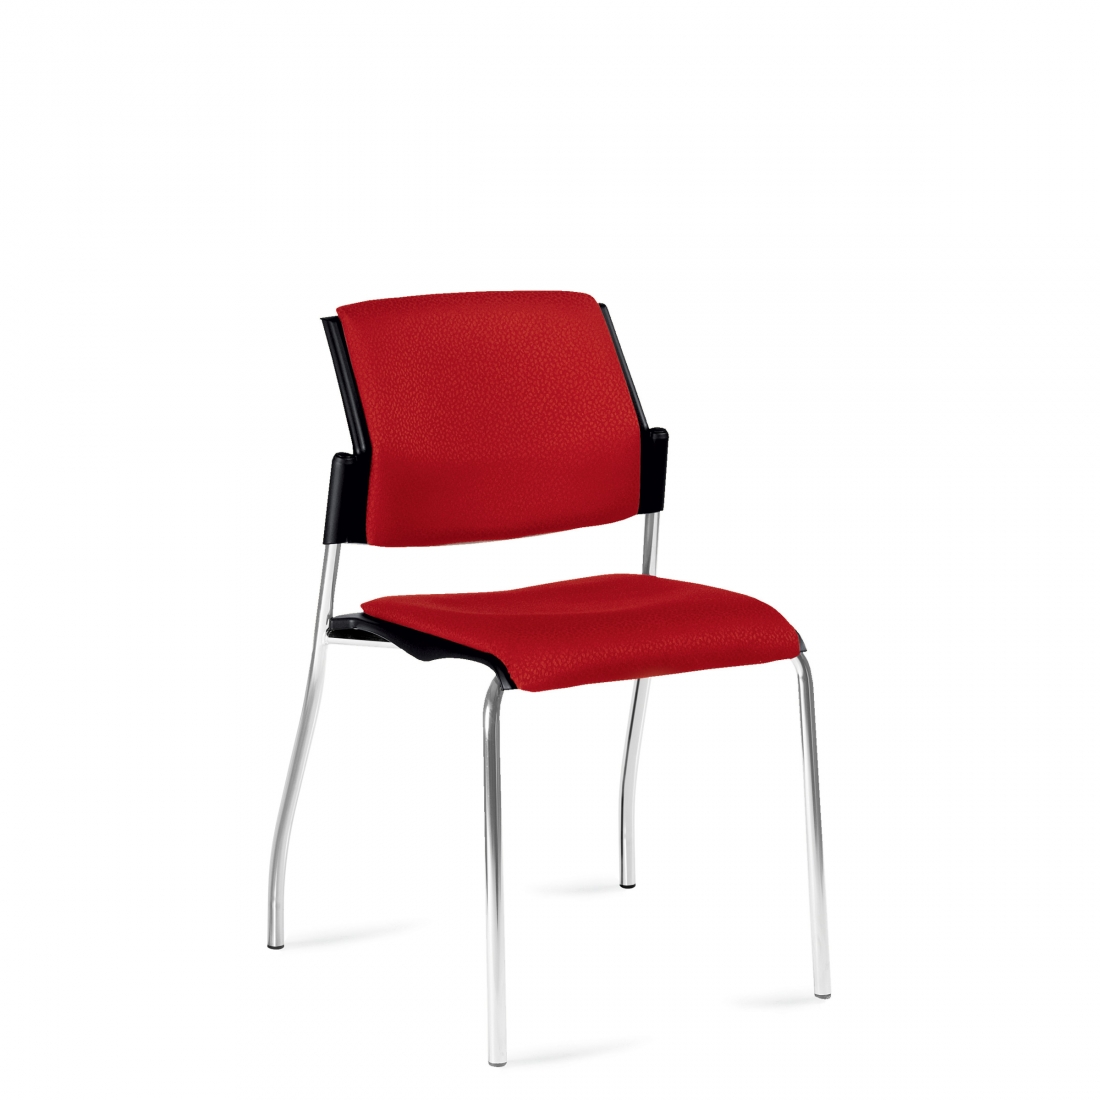 Stacking Chair, Upholstered Seat & Back, Armless